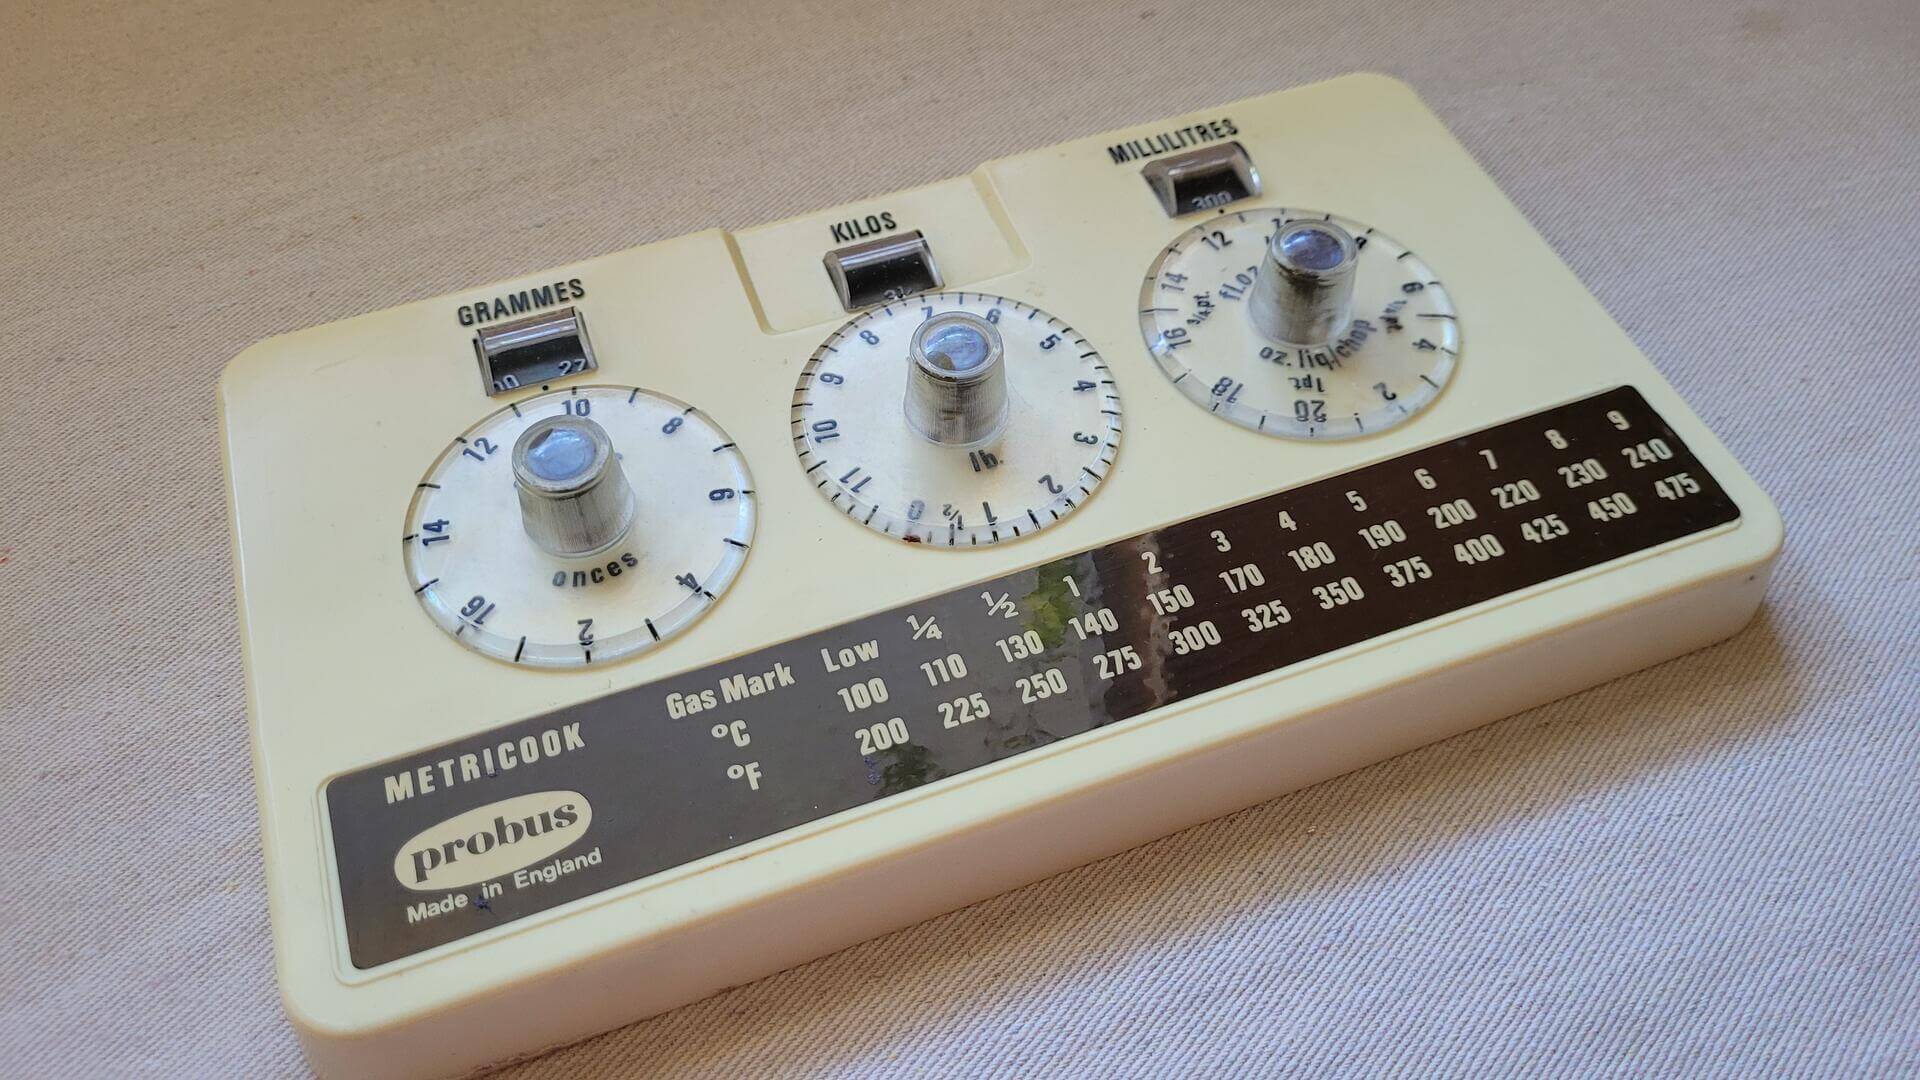 Vintage Probus Metricook wall imperial to metric weight and temperature measurements converter for cooking. This rare collectible made in England chef and kitchen gadget